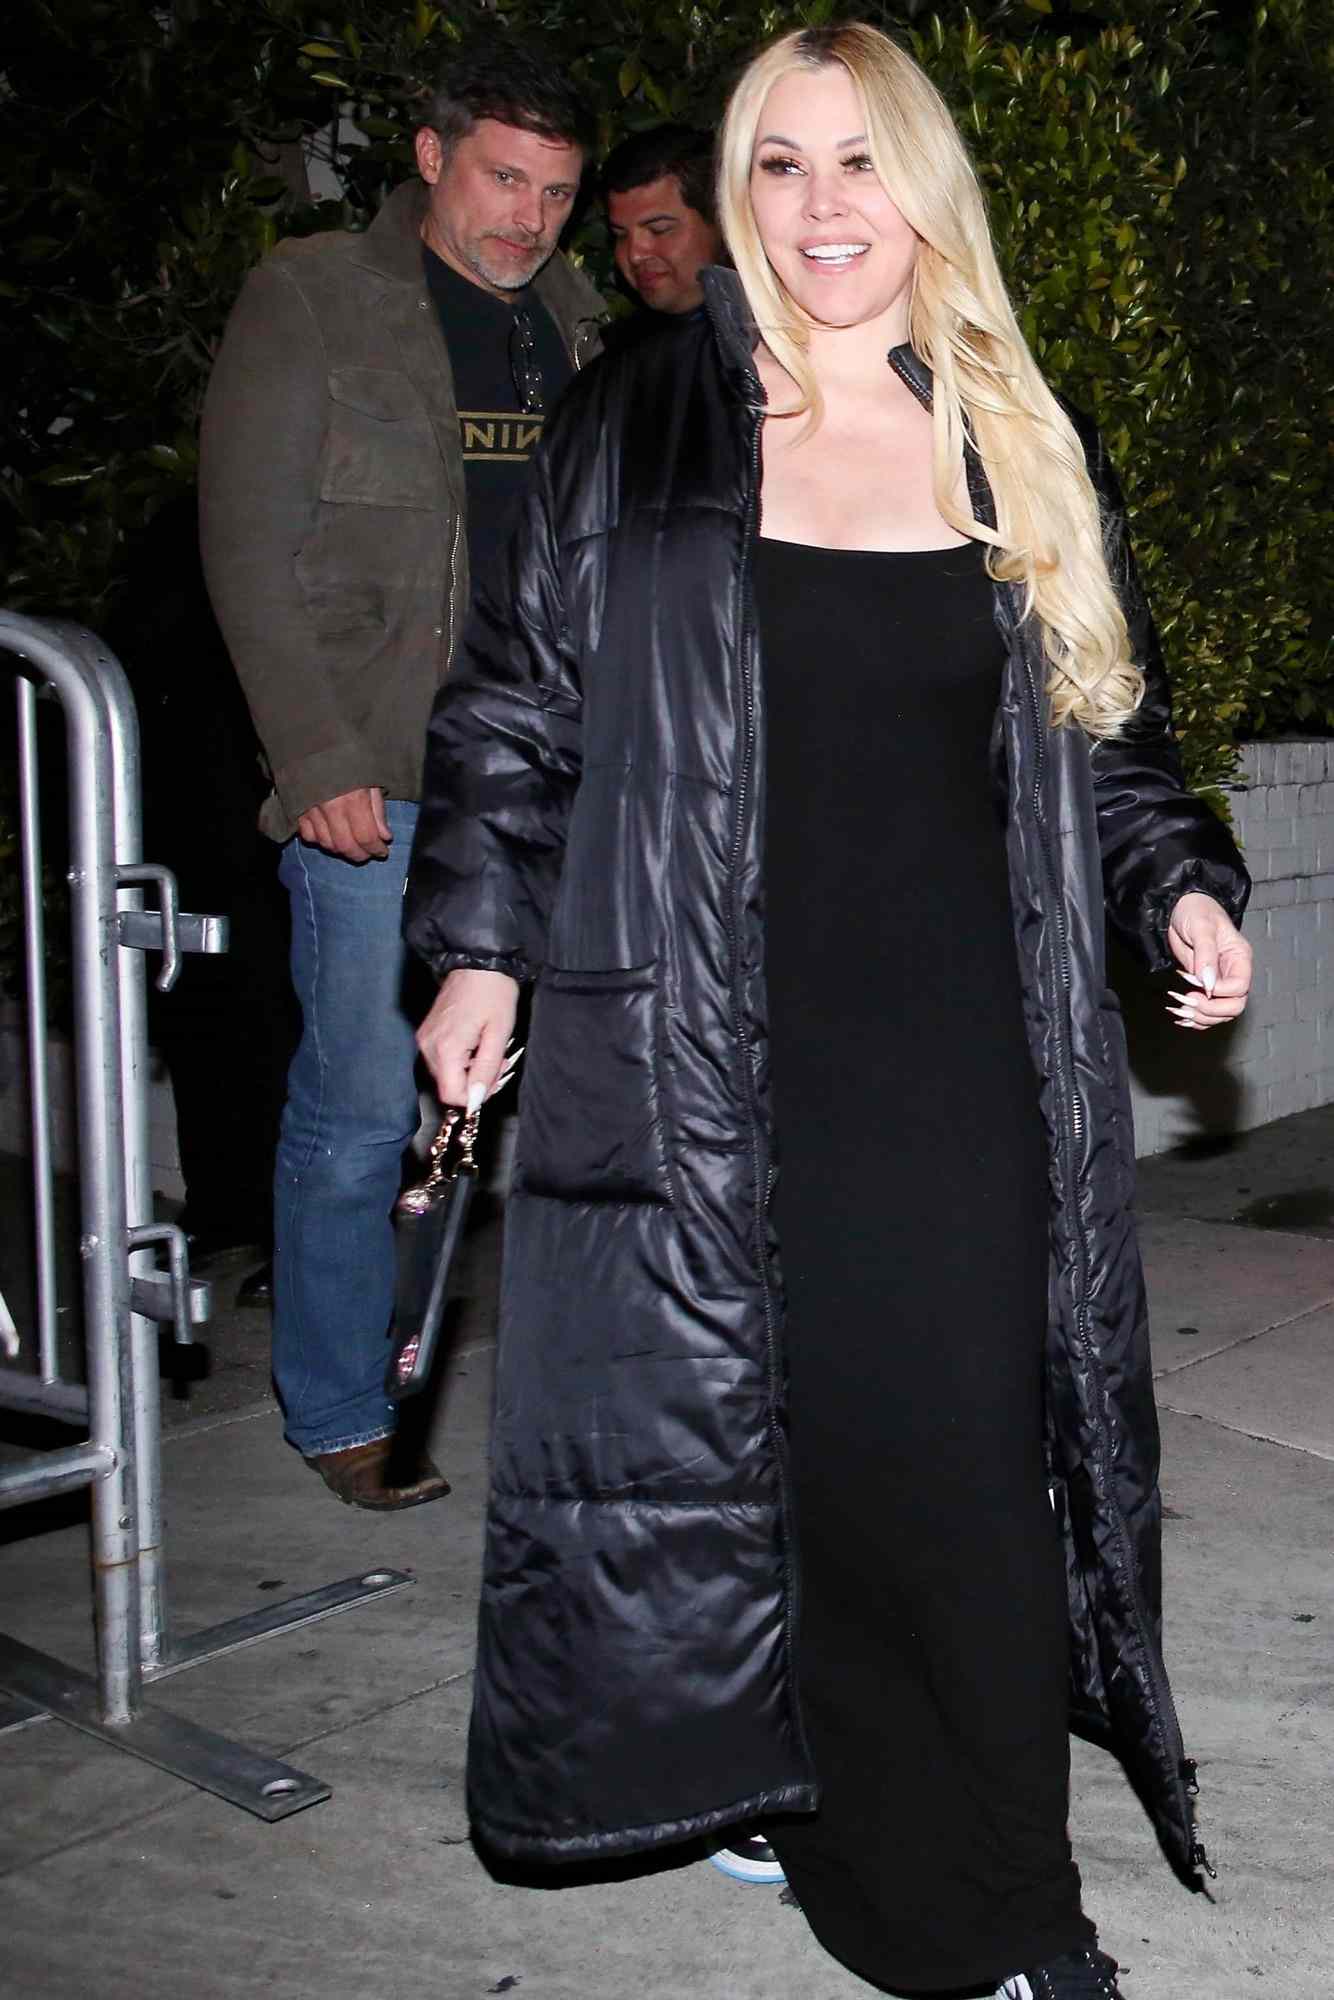 Shanna Moakler, is spotted cozying up with Greg Vaughan at the Black Keys Album Release Party held at Bar Marmont in Los Angeles, sparking rumors of a potential new romance.